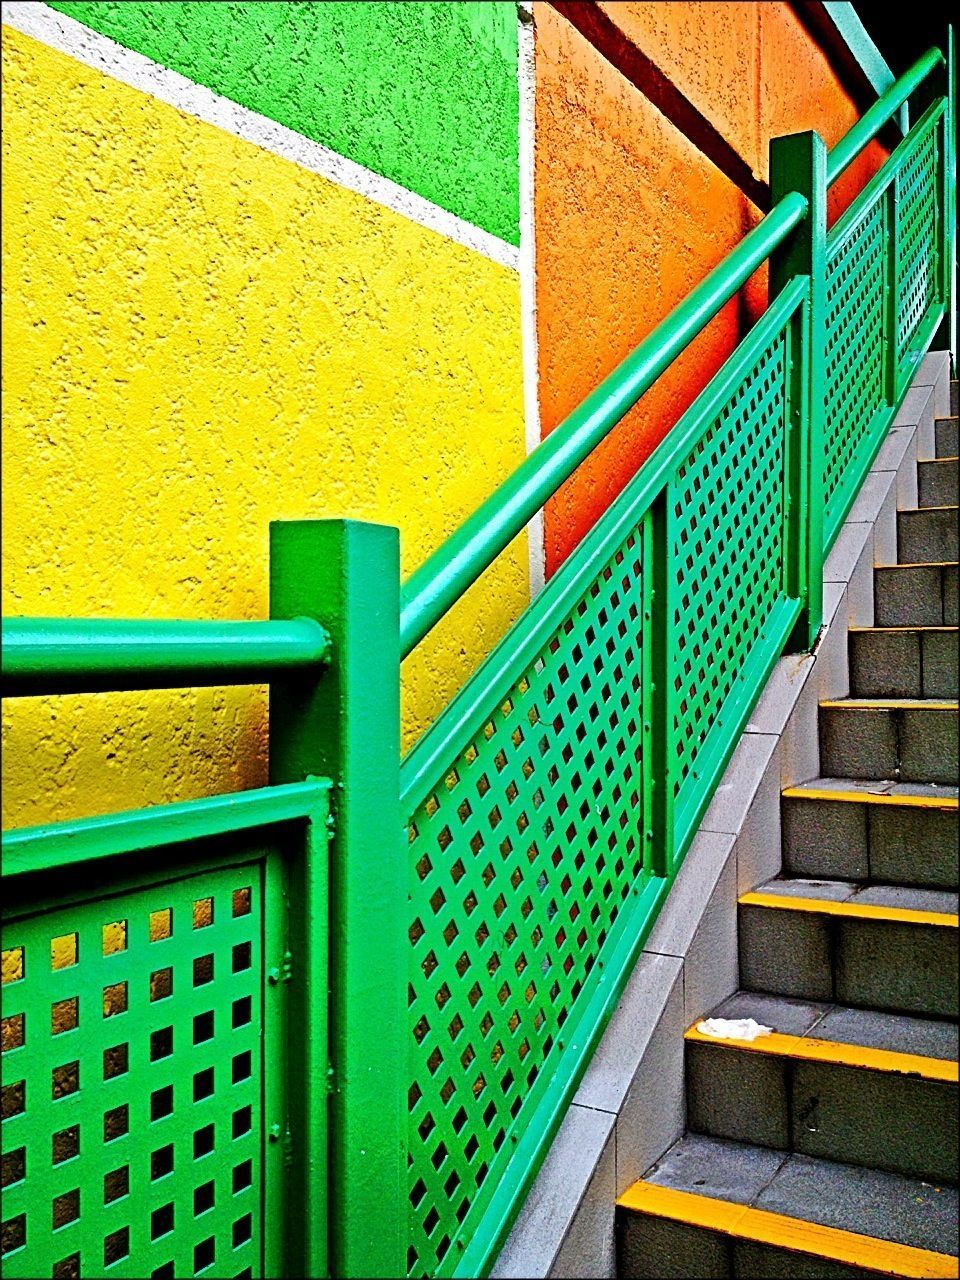 railing, built structure, architecture, pattern, steps, steps and staircases, wall - building feature, full frame, blue, staircase, metal, green color, multi colored, backgrounds, design, no people, building exterior, high angle view, yellow, day